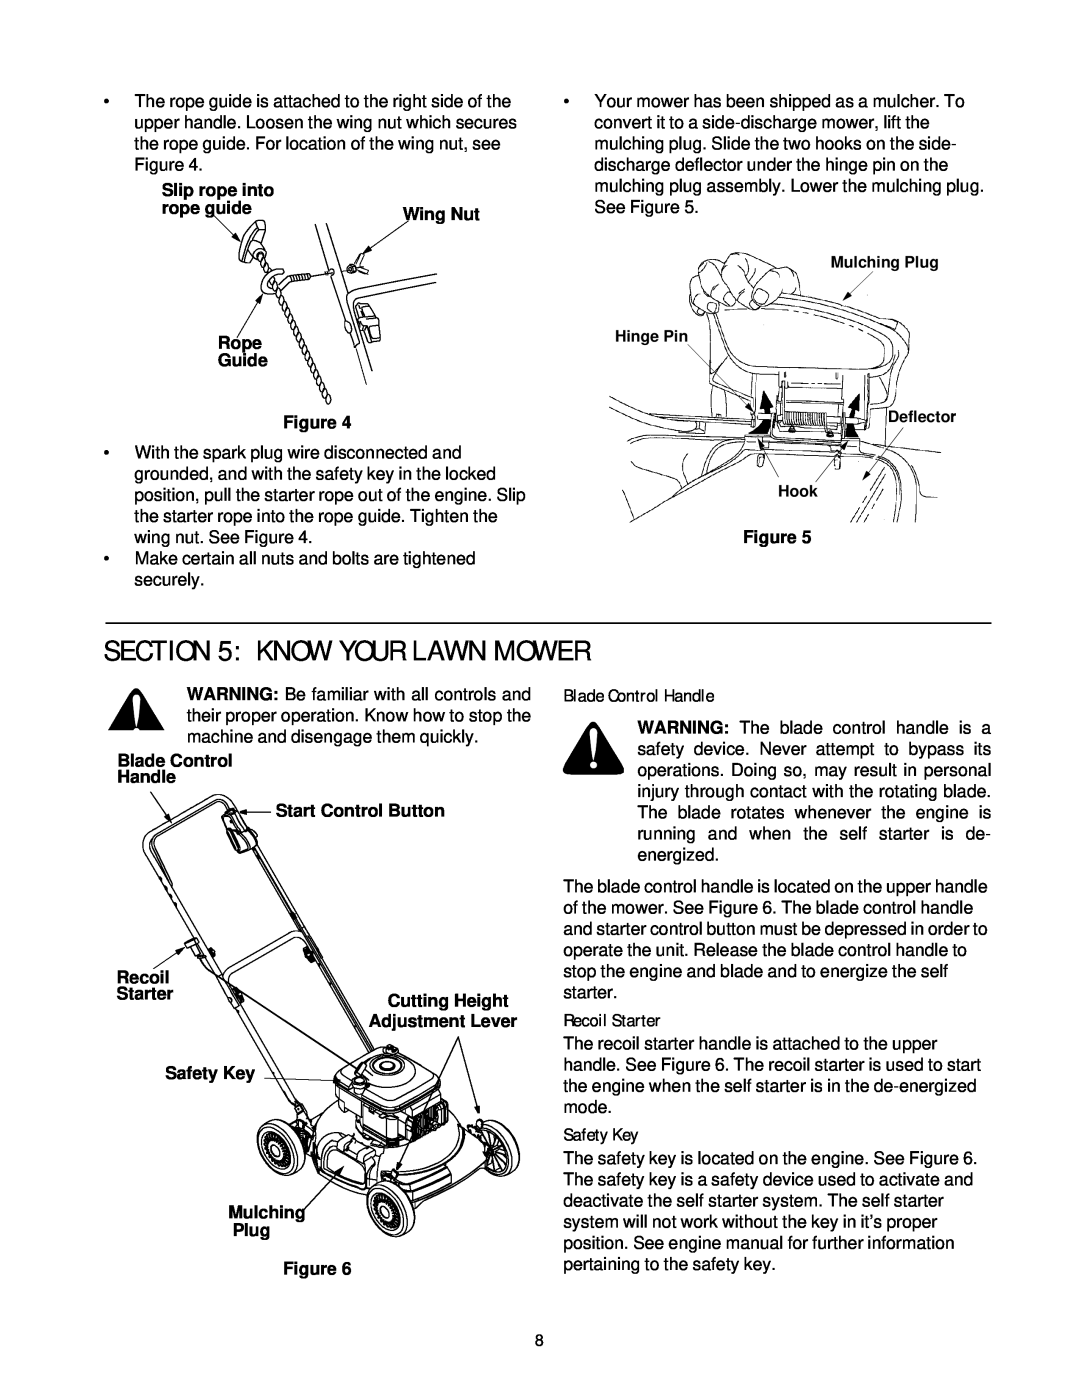 Yard-Man 109T manual Know Your Lawn Mower, Blade Control Handle, Recoil Starter, Safety Key 